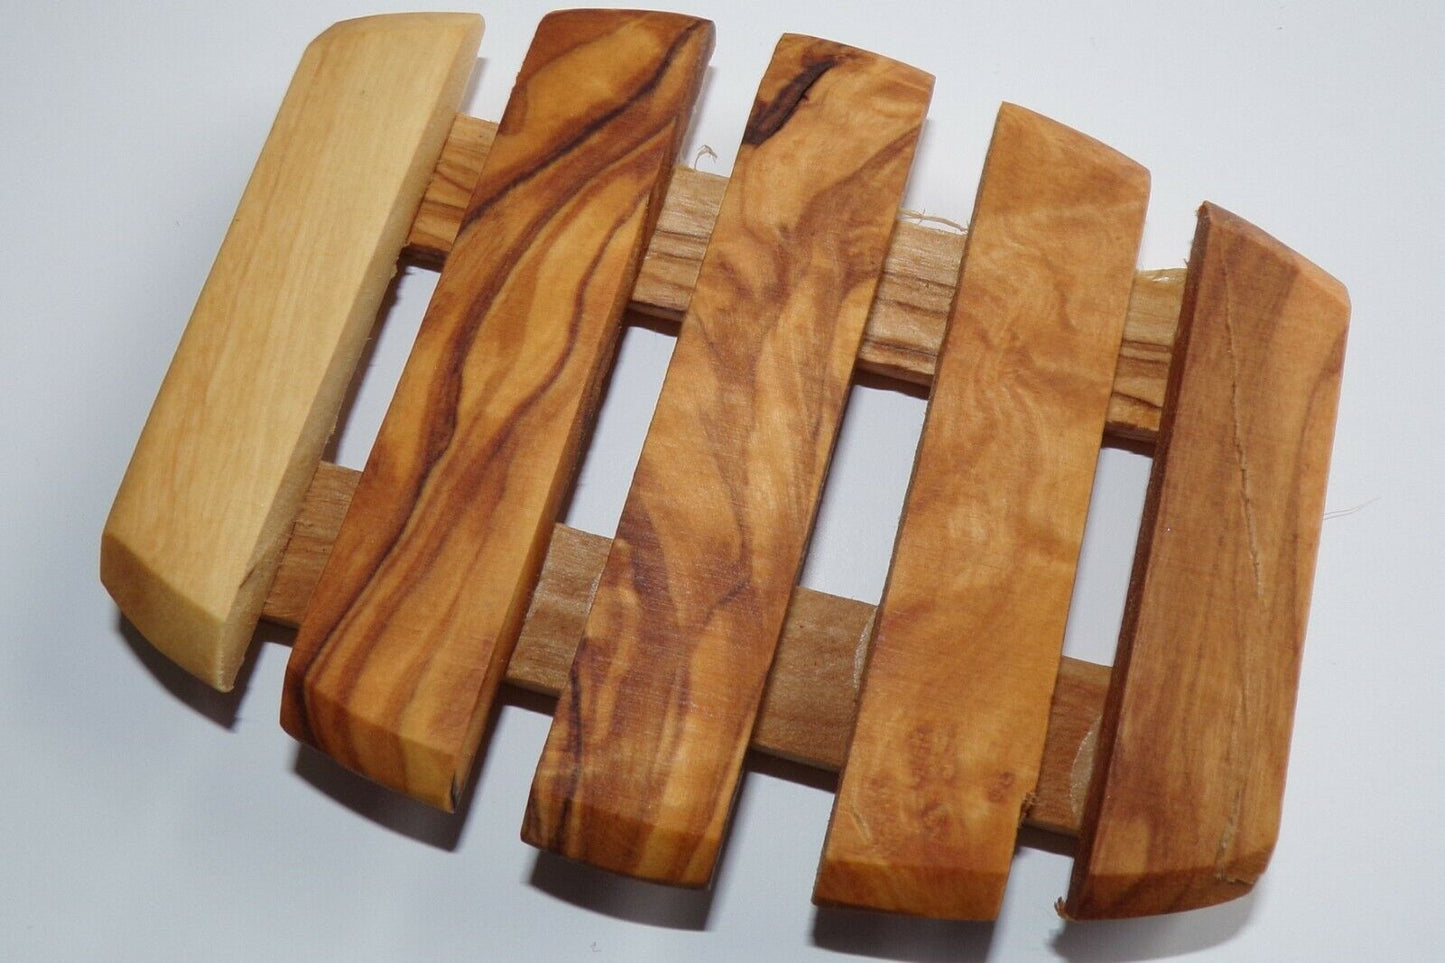 Handcrafted Olive Wood Soap Tray - Natural and Eco-Friendly